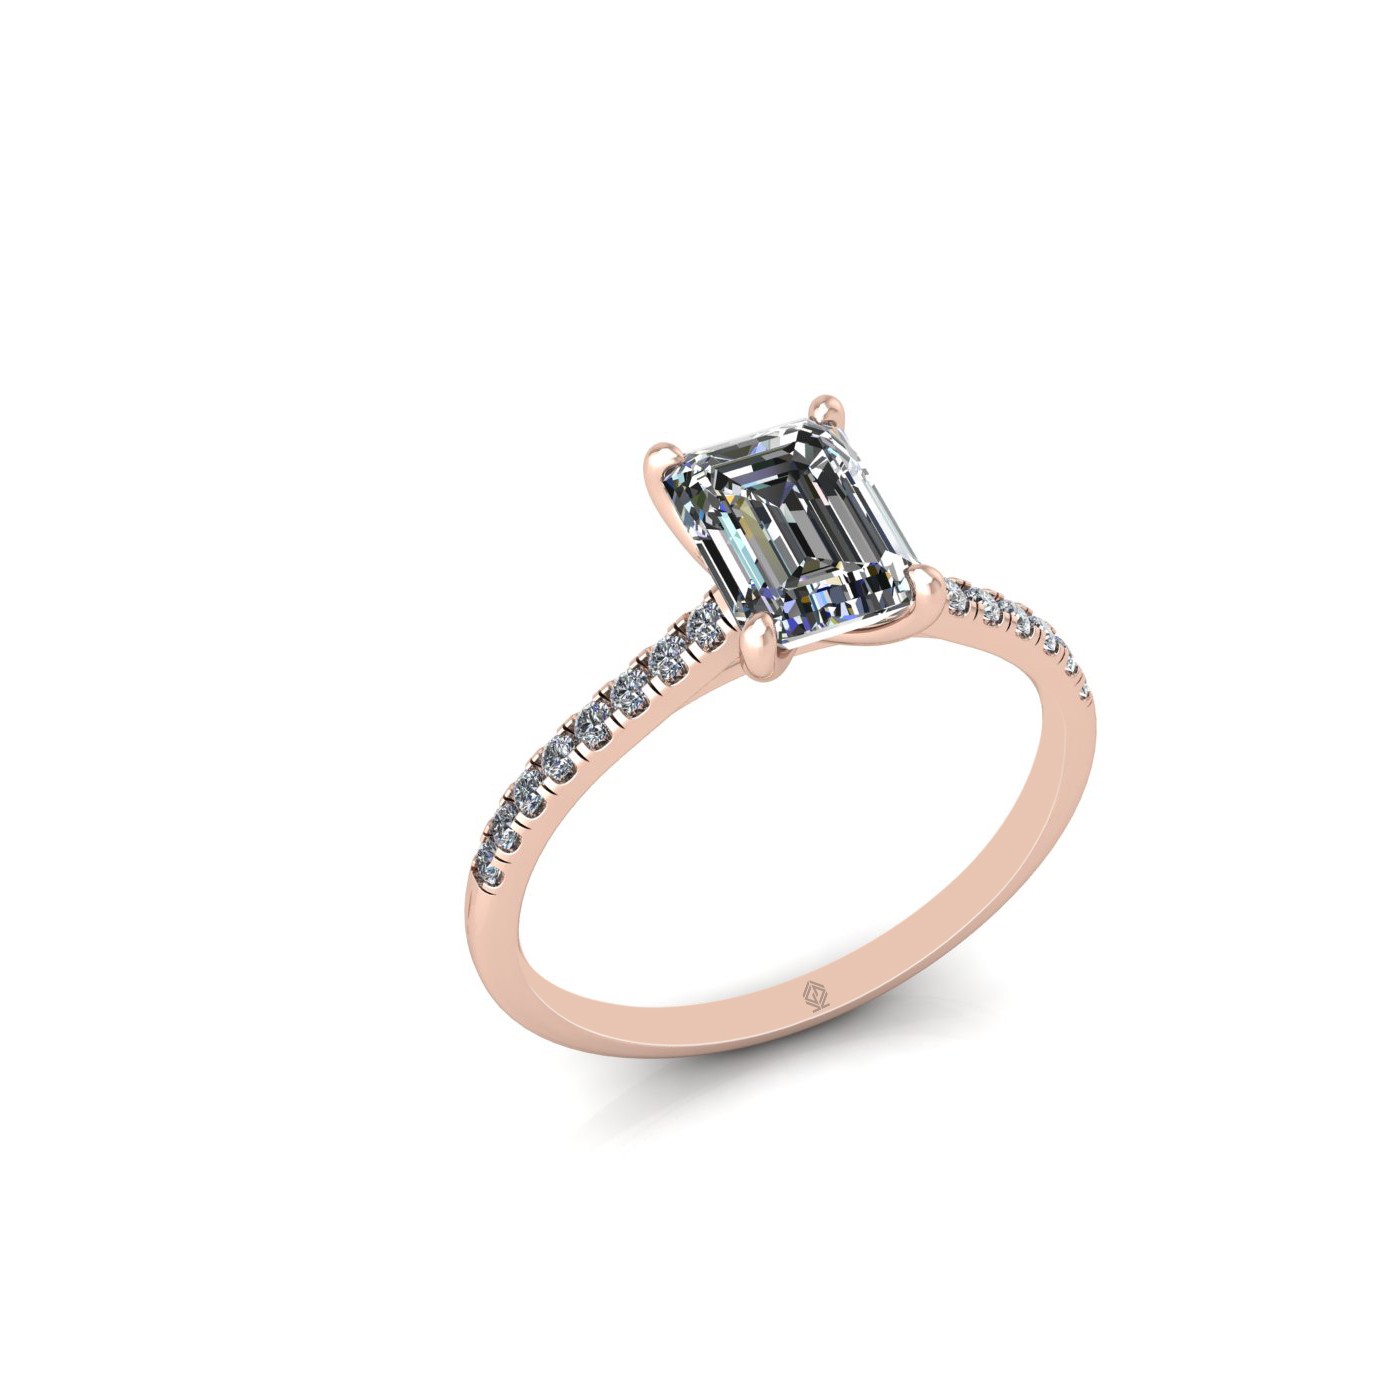 18k rose gold 1.2ct 4 prongs emerald cut diamond engagement ring with whisper thin pavÉ set band Photos & images